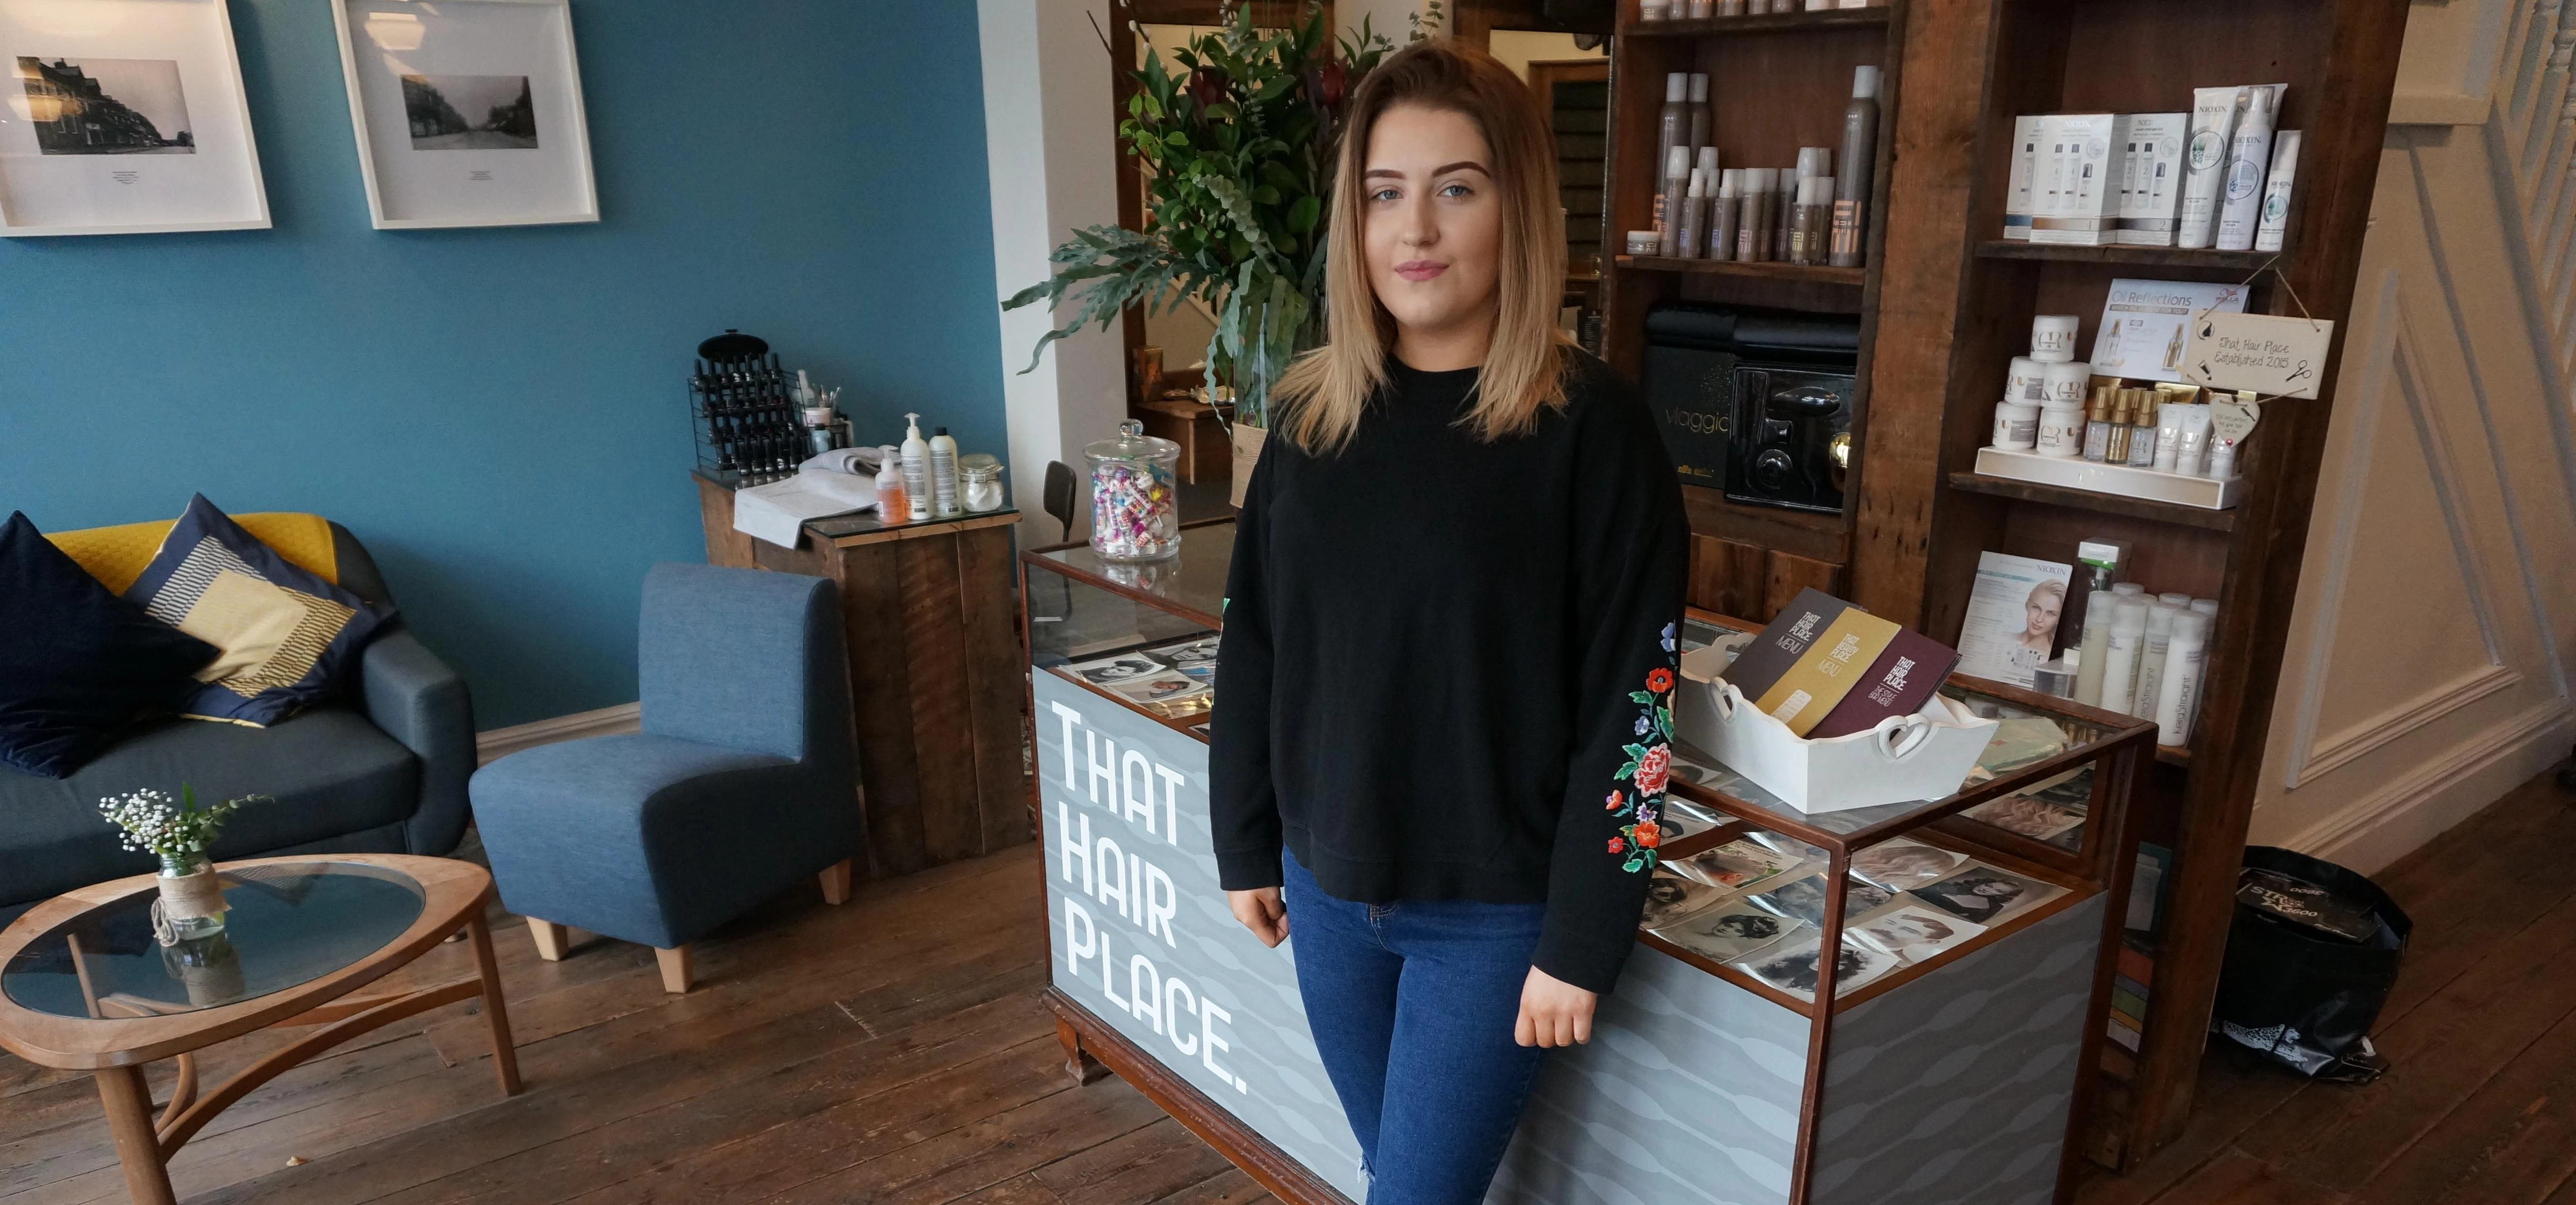 Maddie Frazer-Hanley, apprentice at That Hair Place in Heaton Moor